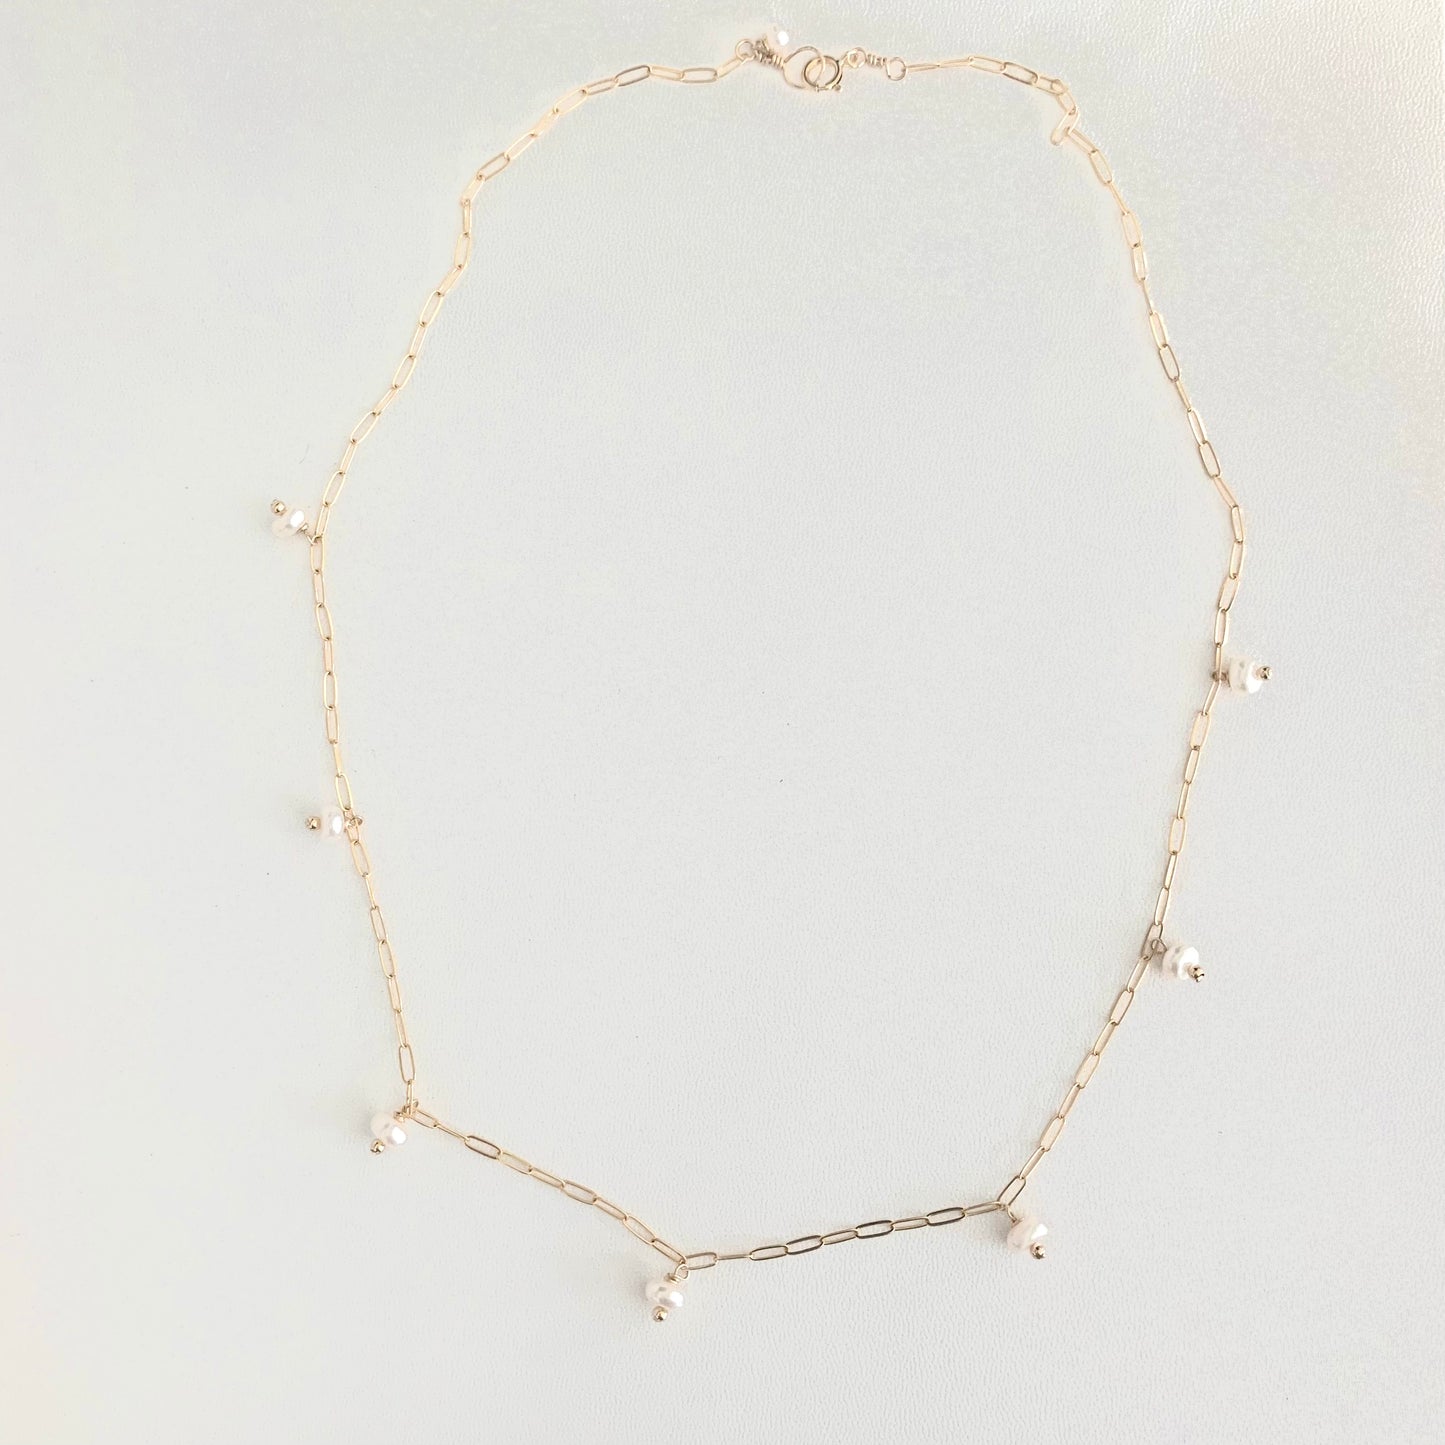 Marie petite freshwater pearl necklace